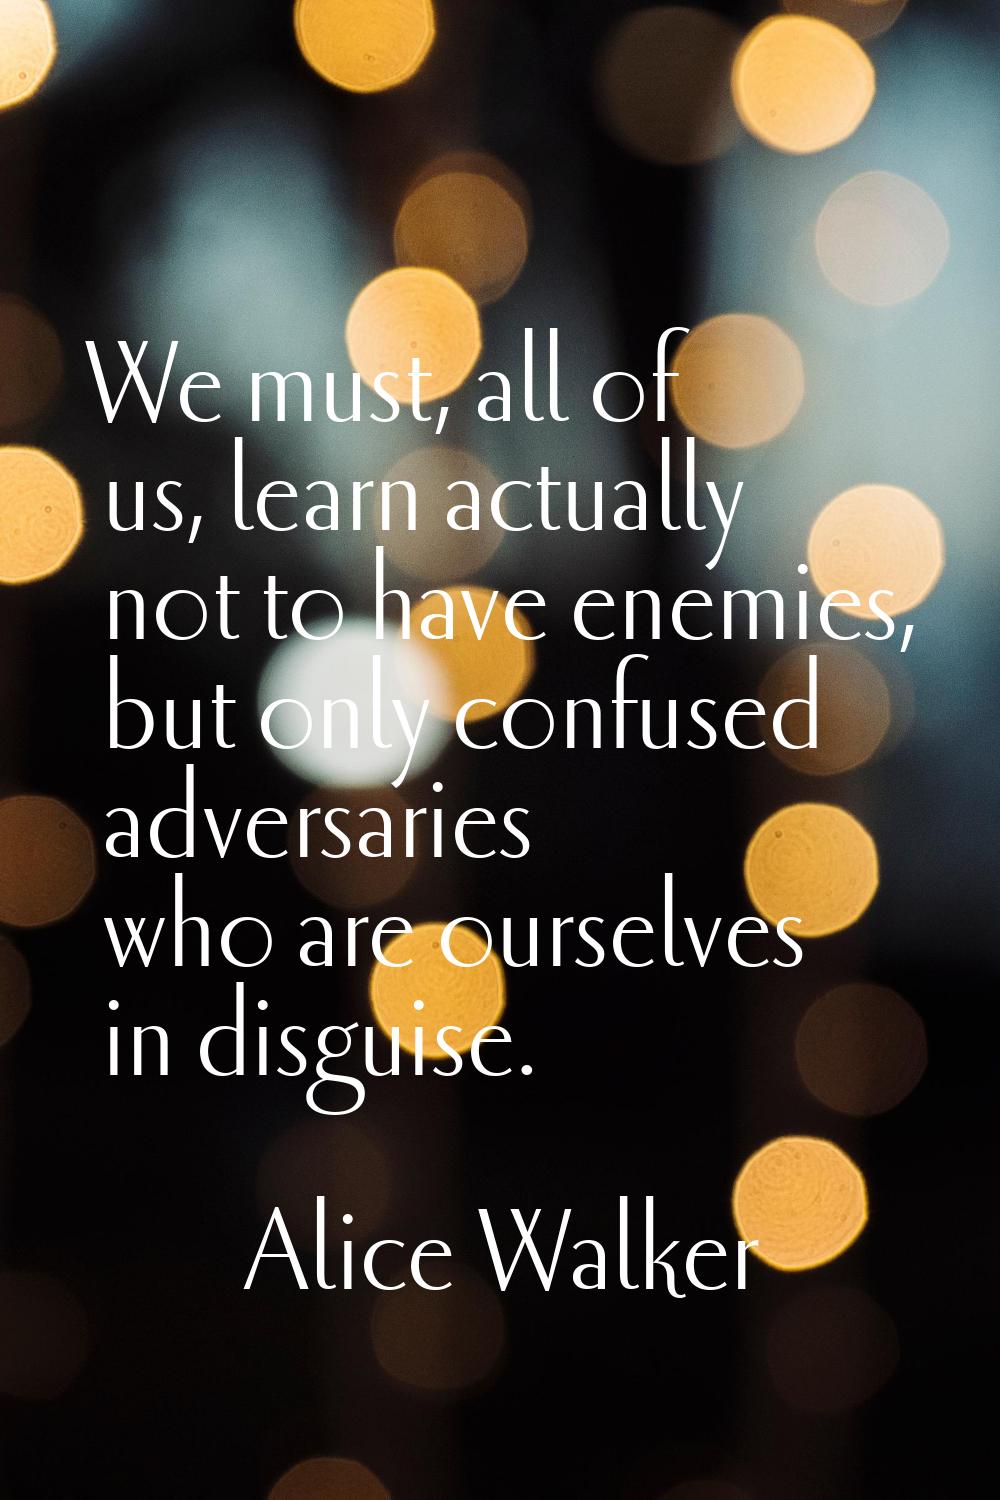 We must, all of us, learn actually not to have enemies, but only confused adversaries who are ourse